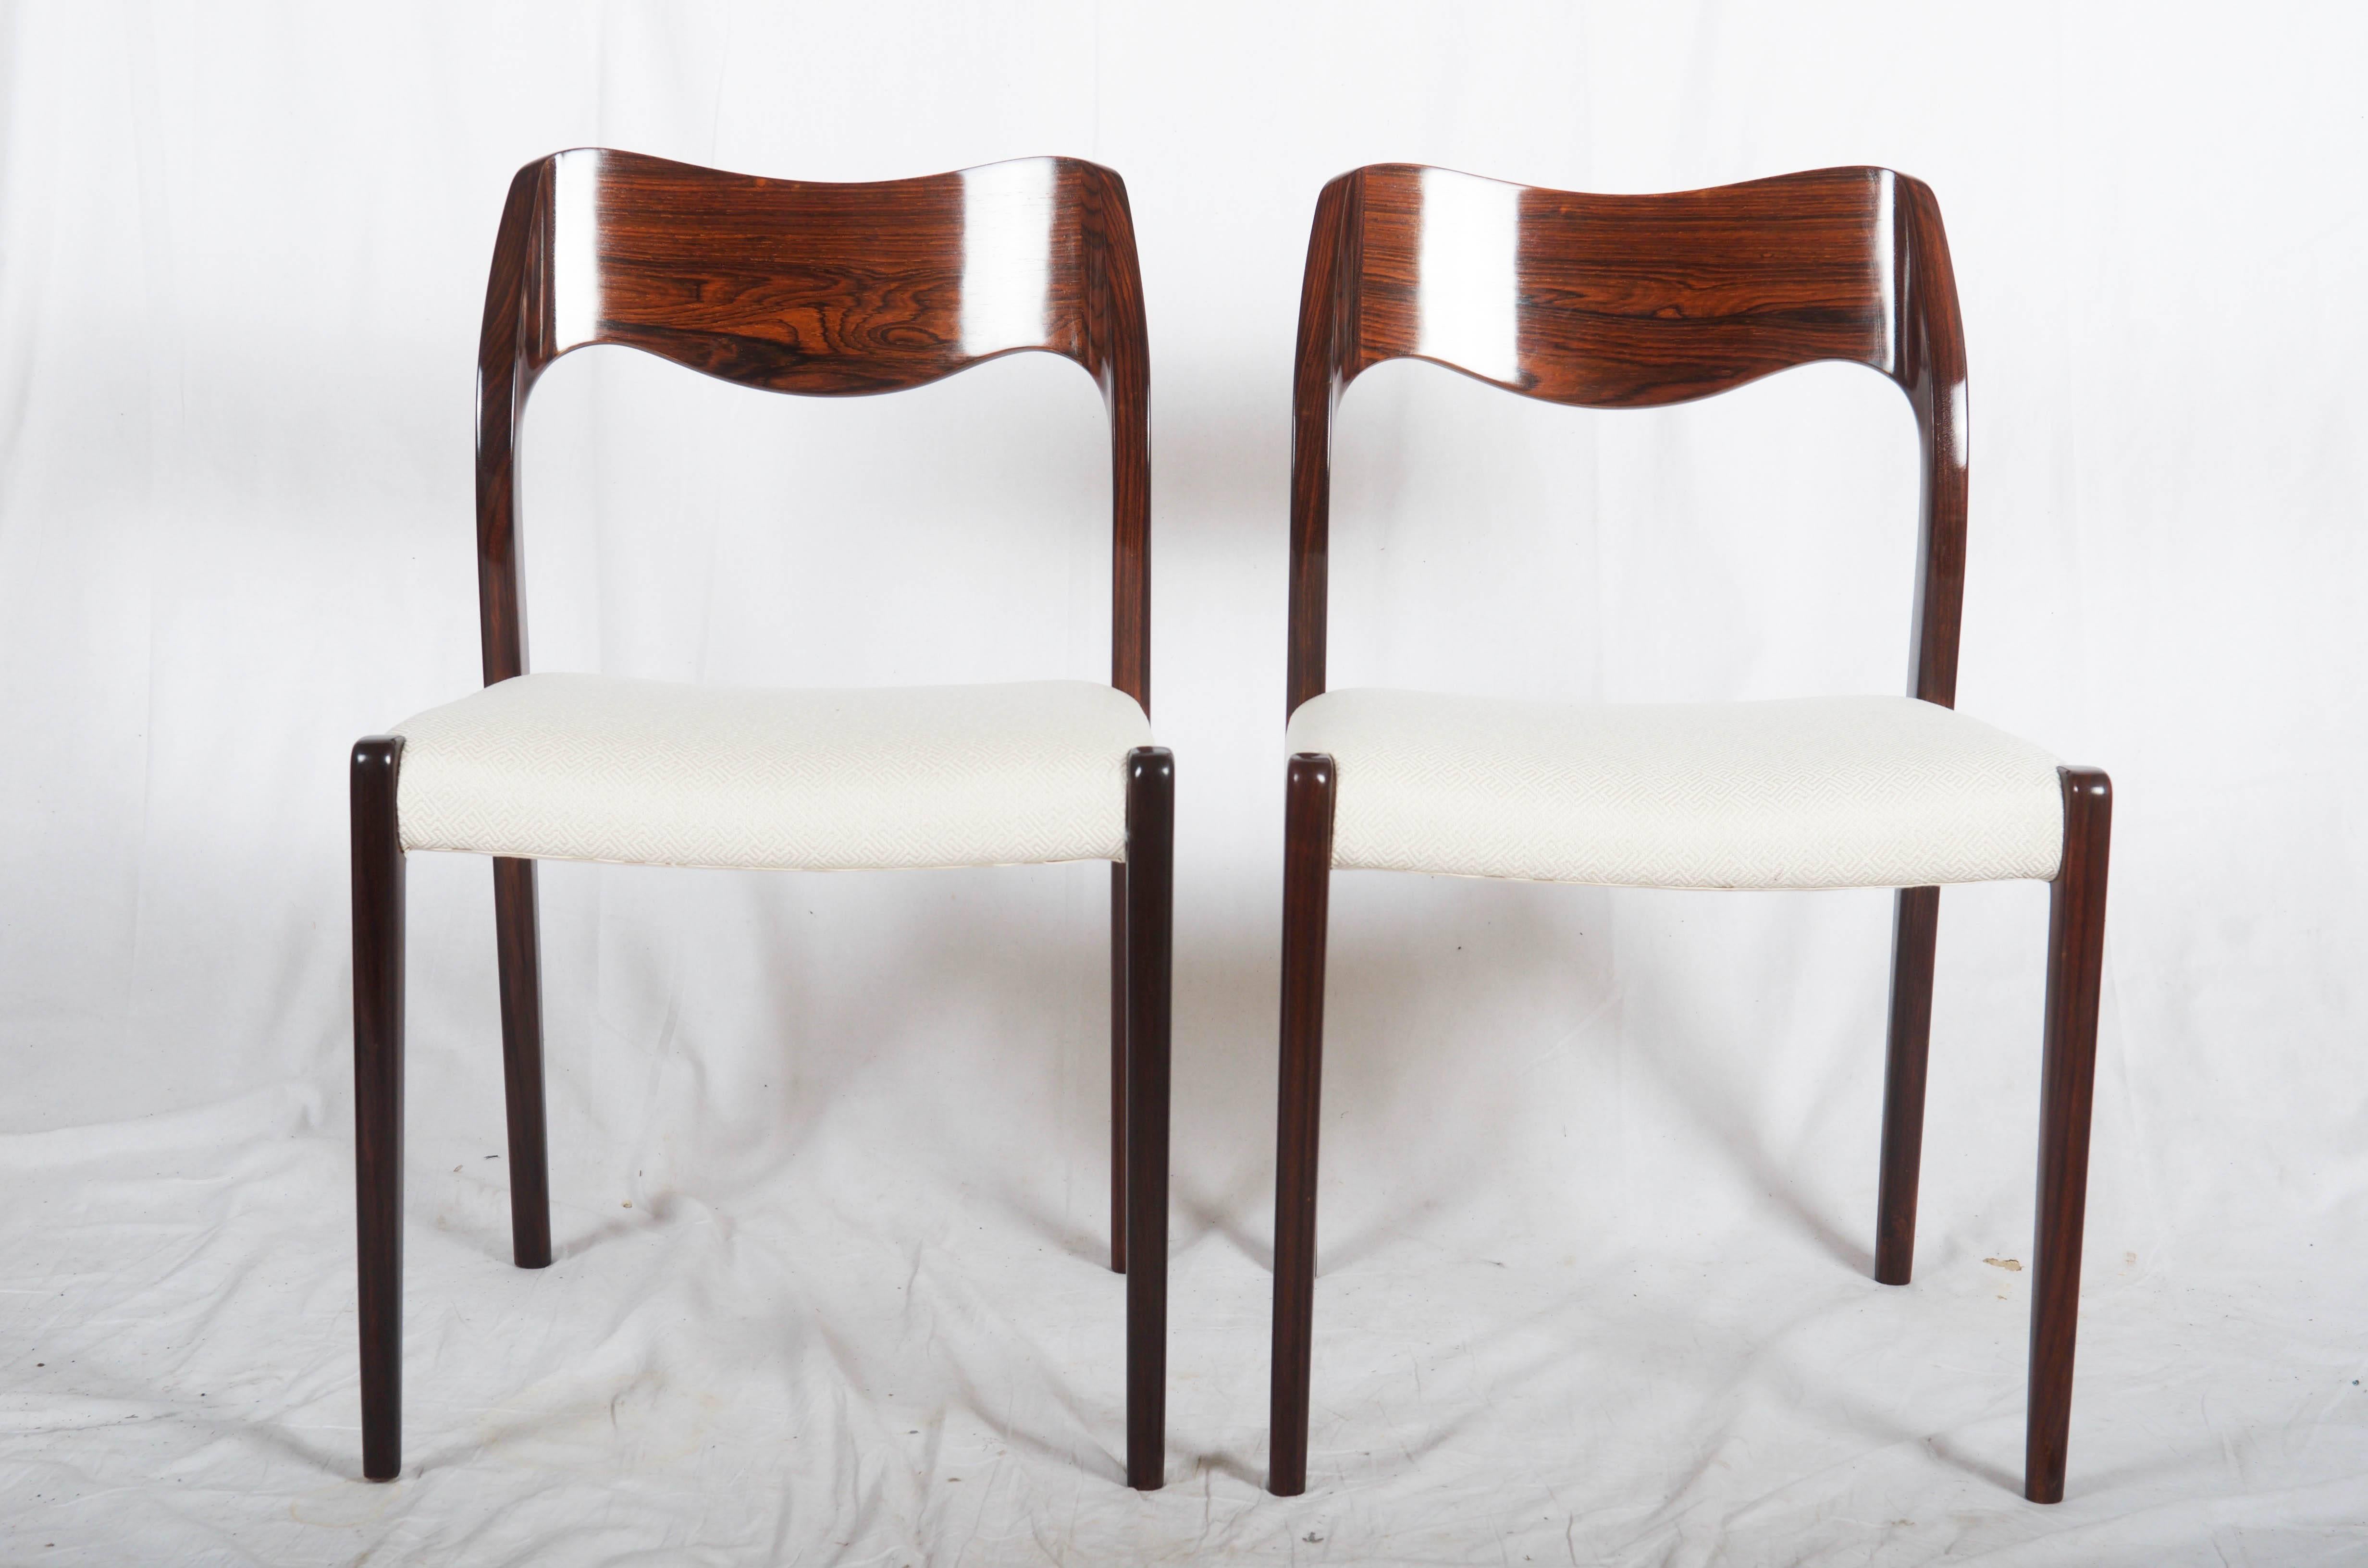 Dining chair made of hardwood, designed 1951 by Niels Otto Møller and produced by J. L. Møller Møbelfabrik, model number 71. Excellent restored with new upholstered. (Another fabric or leather of course possible) Up to 12 available, delivery time